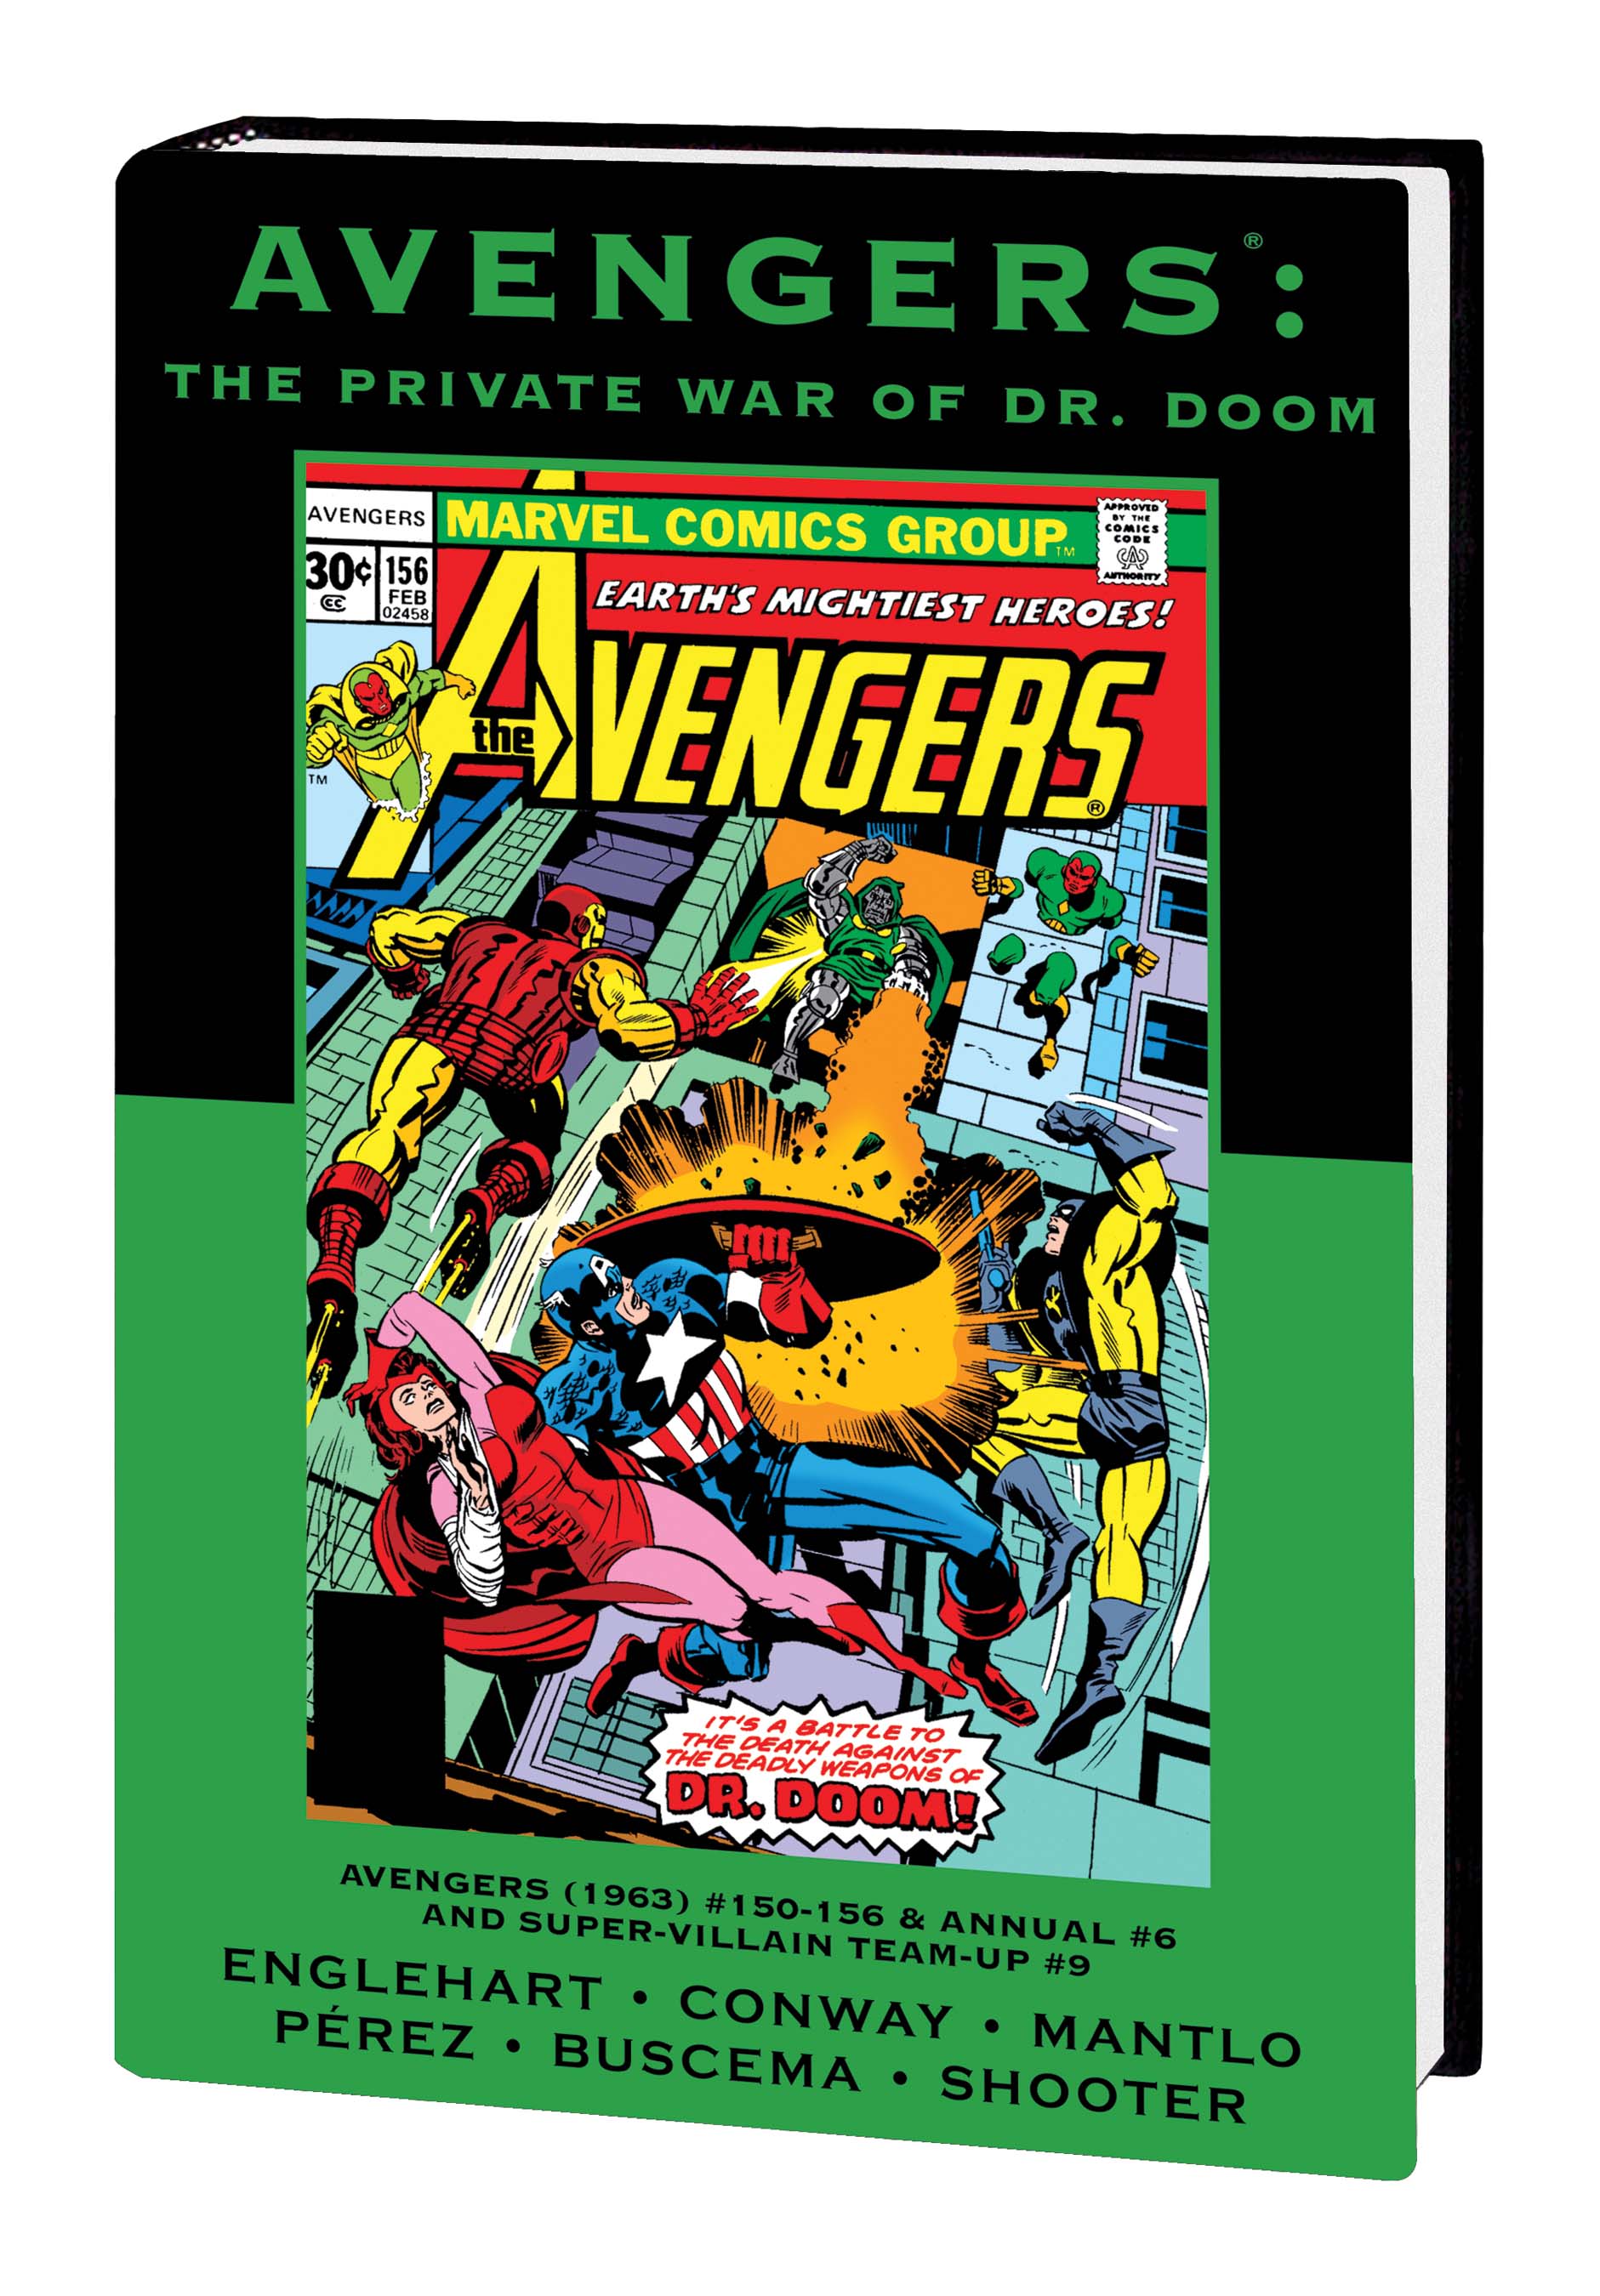 Avengers: The Private War of Dr. Doom (Hardcover)